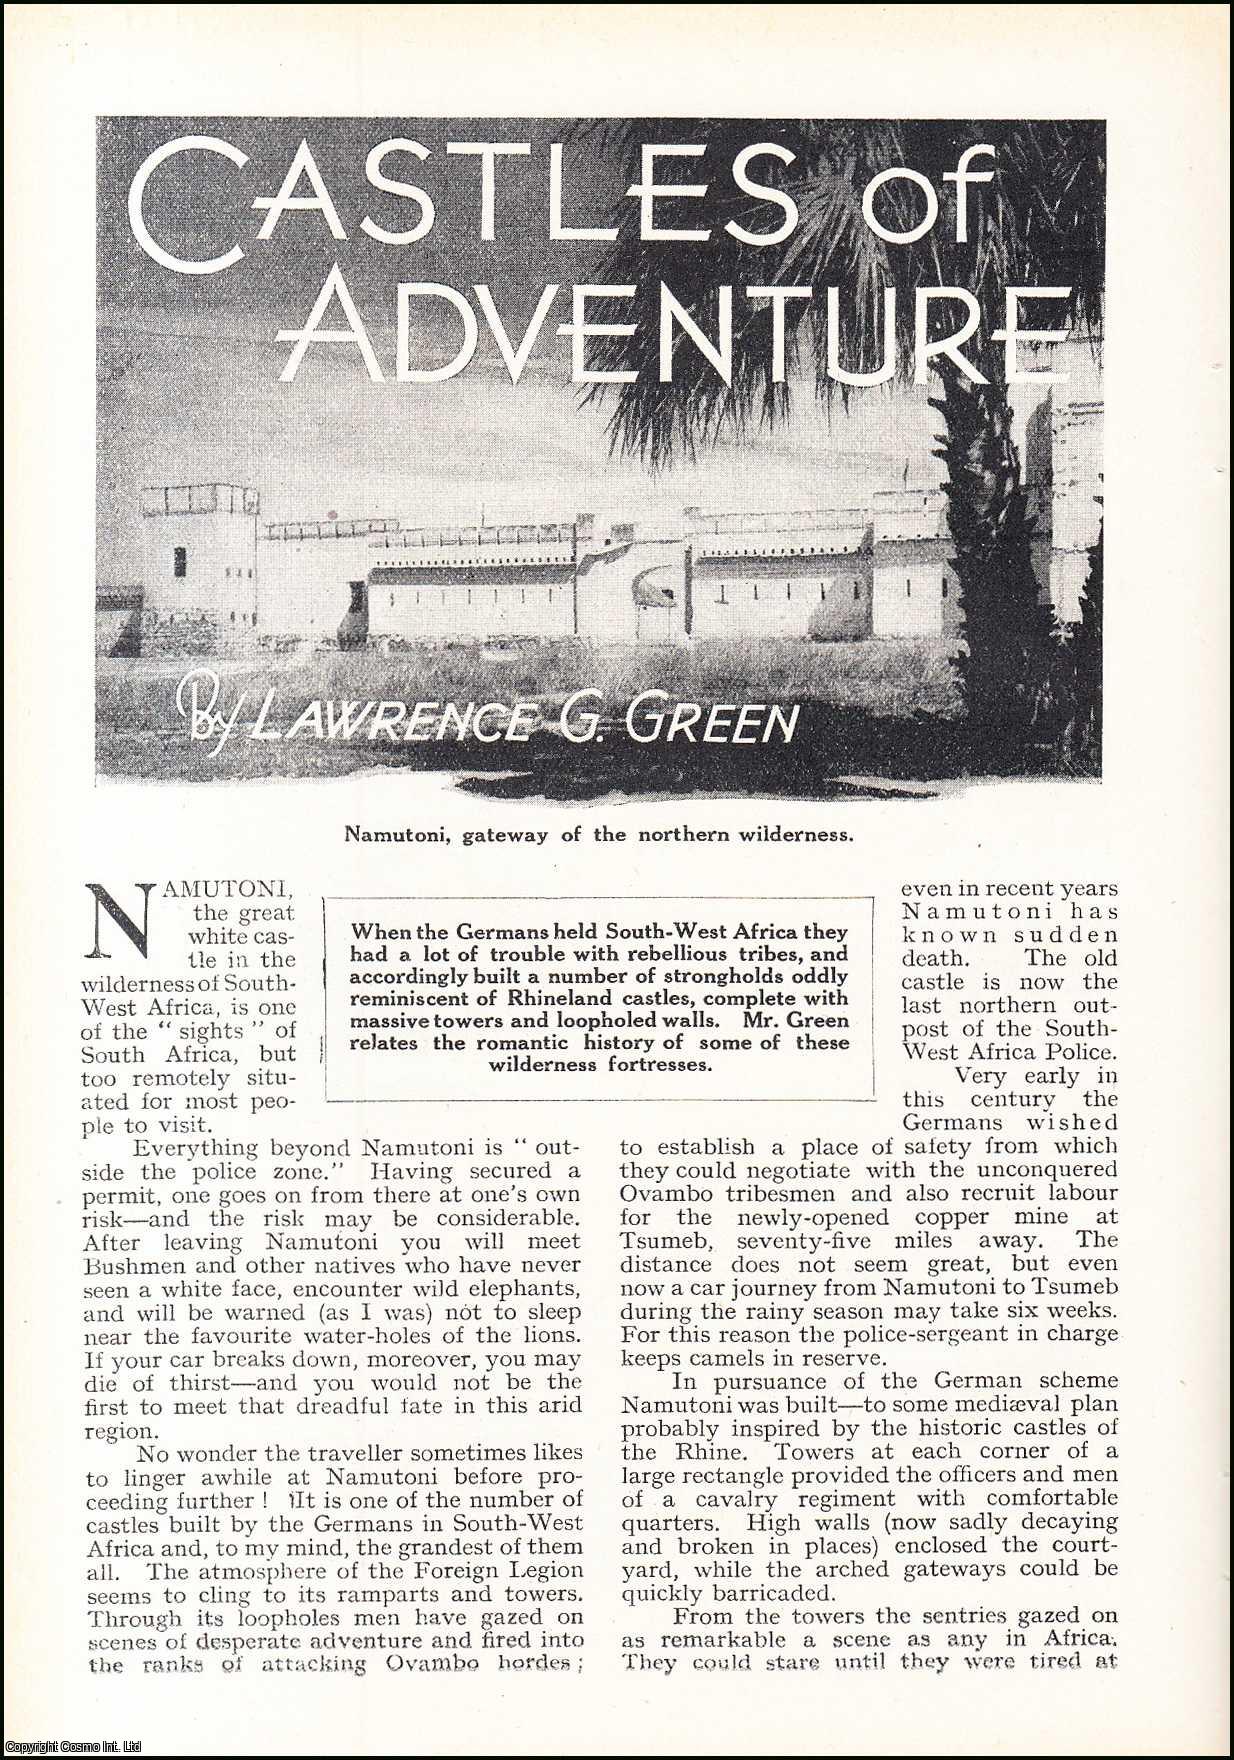 Lawrence G. Green - Castles of Adventure : German Forts in South West Africa. An uncommon original article from the Wide World Magazine, 1938.